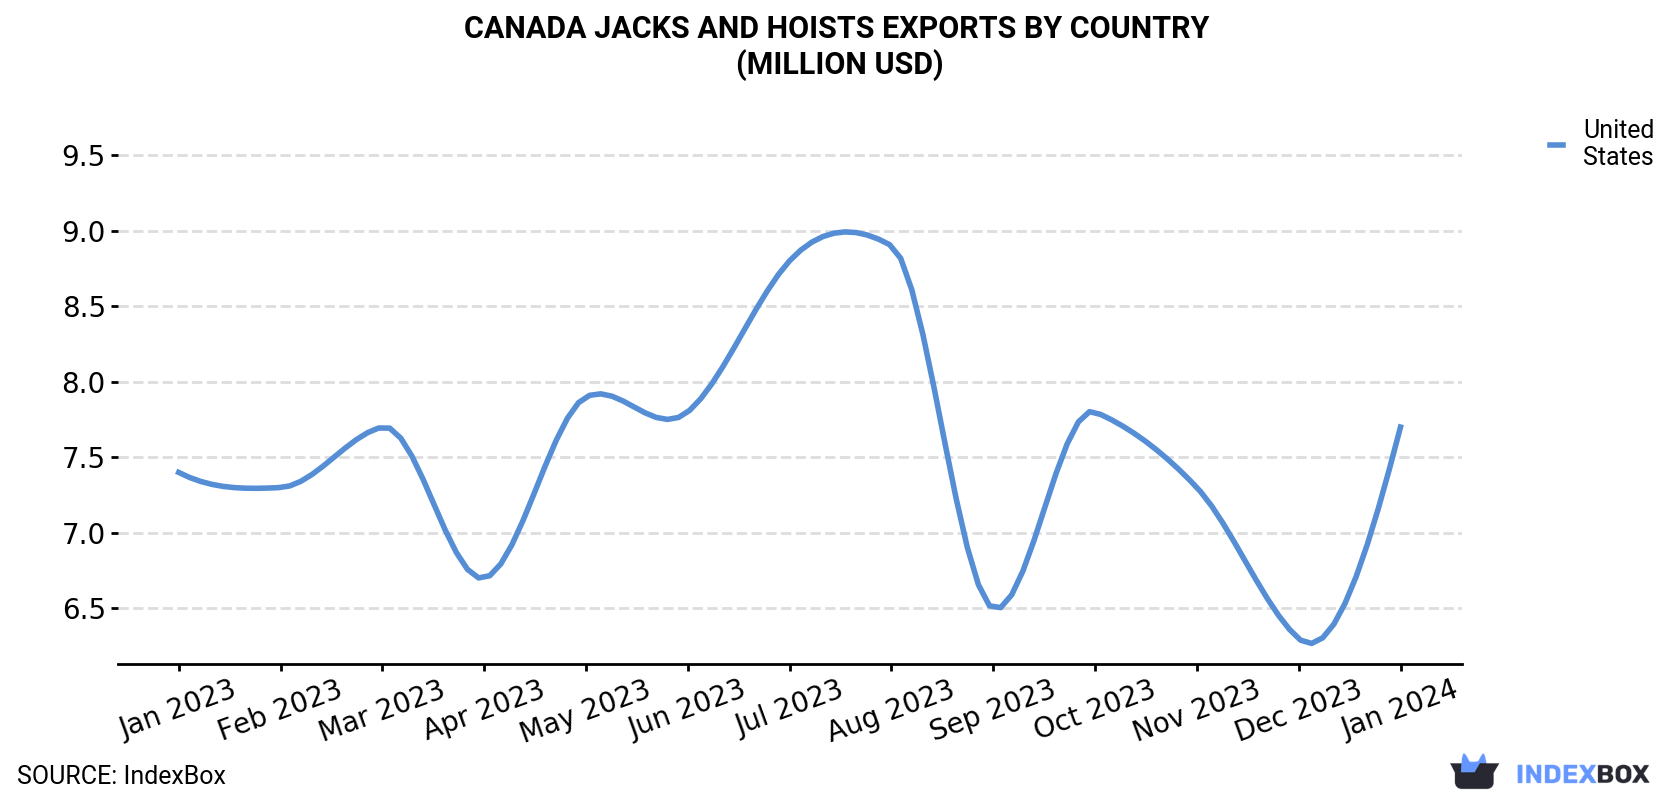 Canada Jacks And Hoists Exports By Country (Million USD)